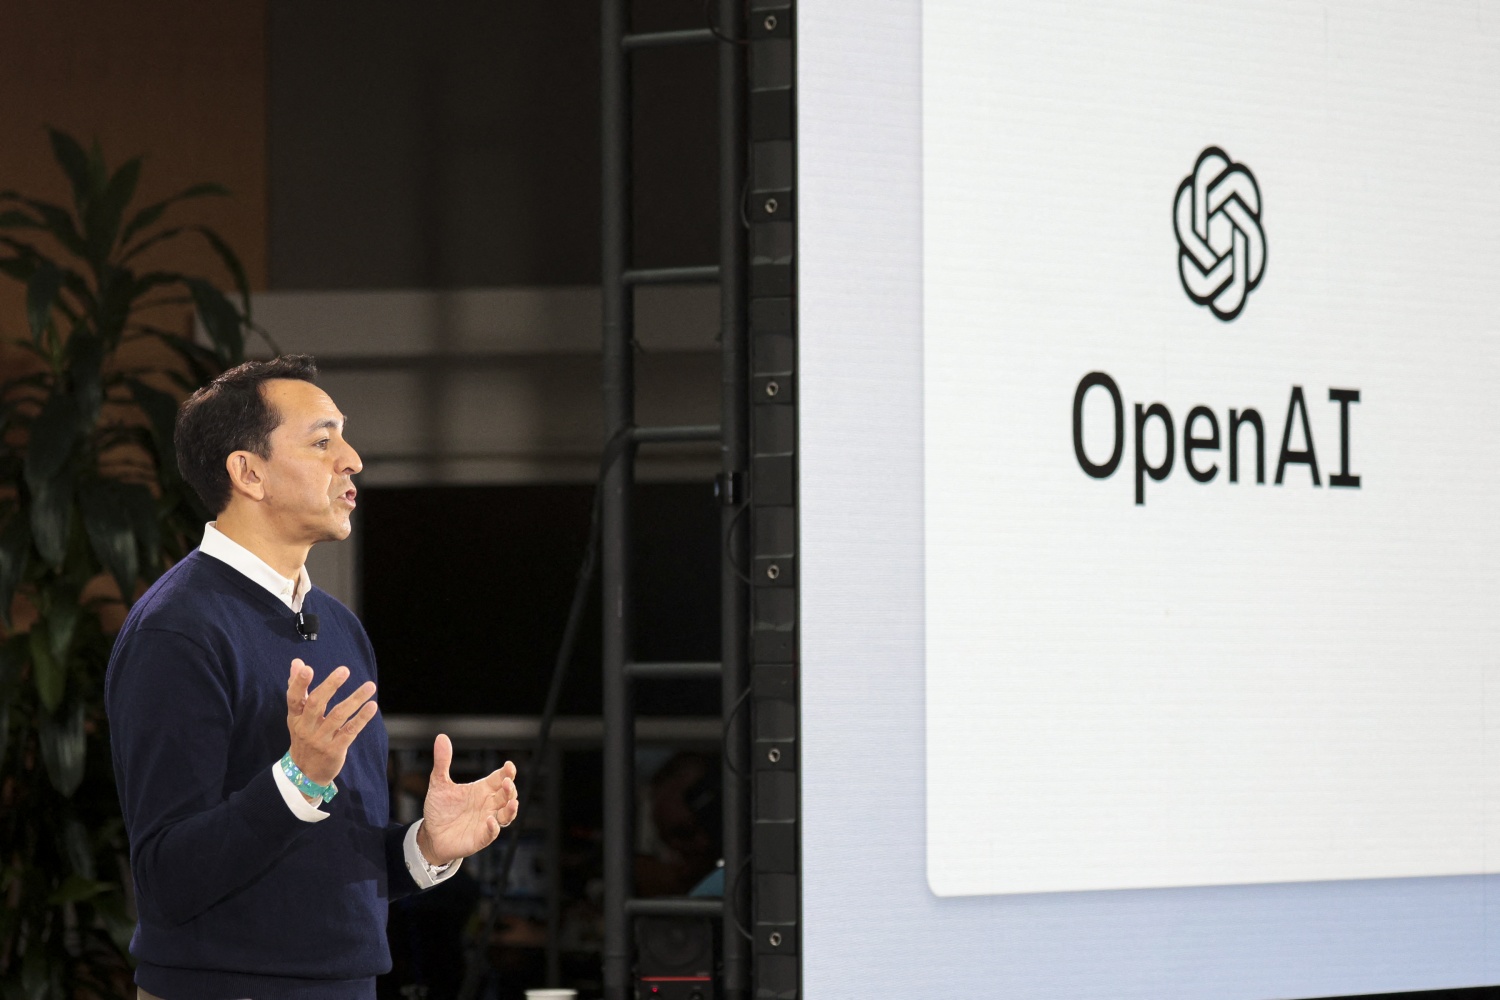 OpenAI is getting into web search but Google still has a head start. 